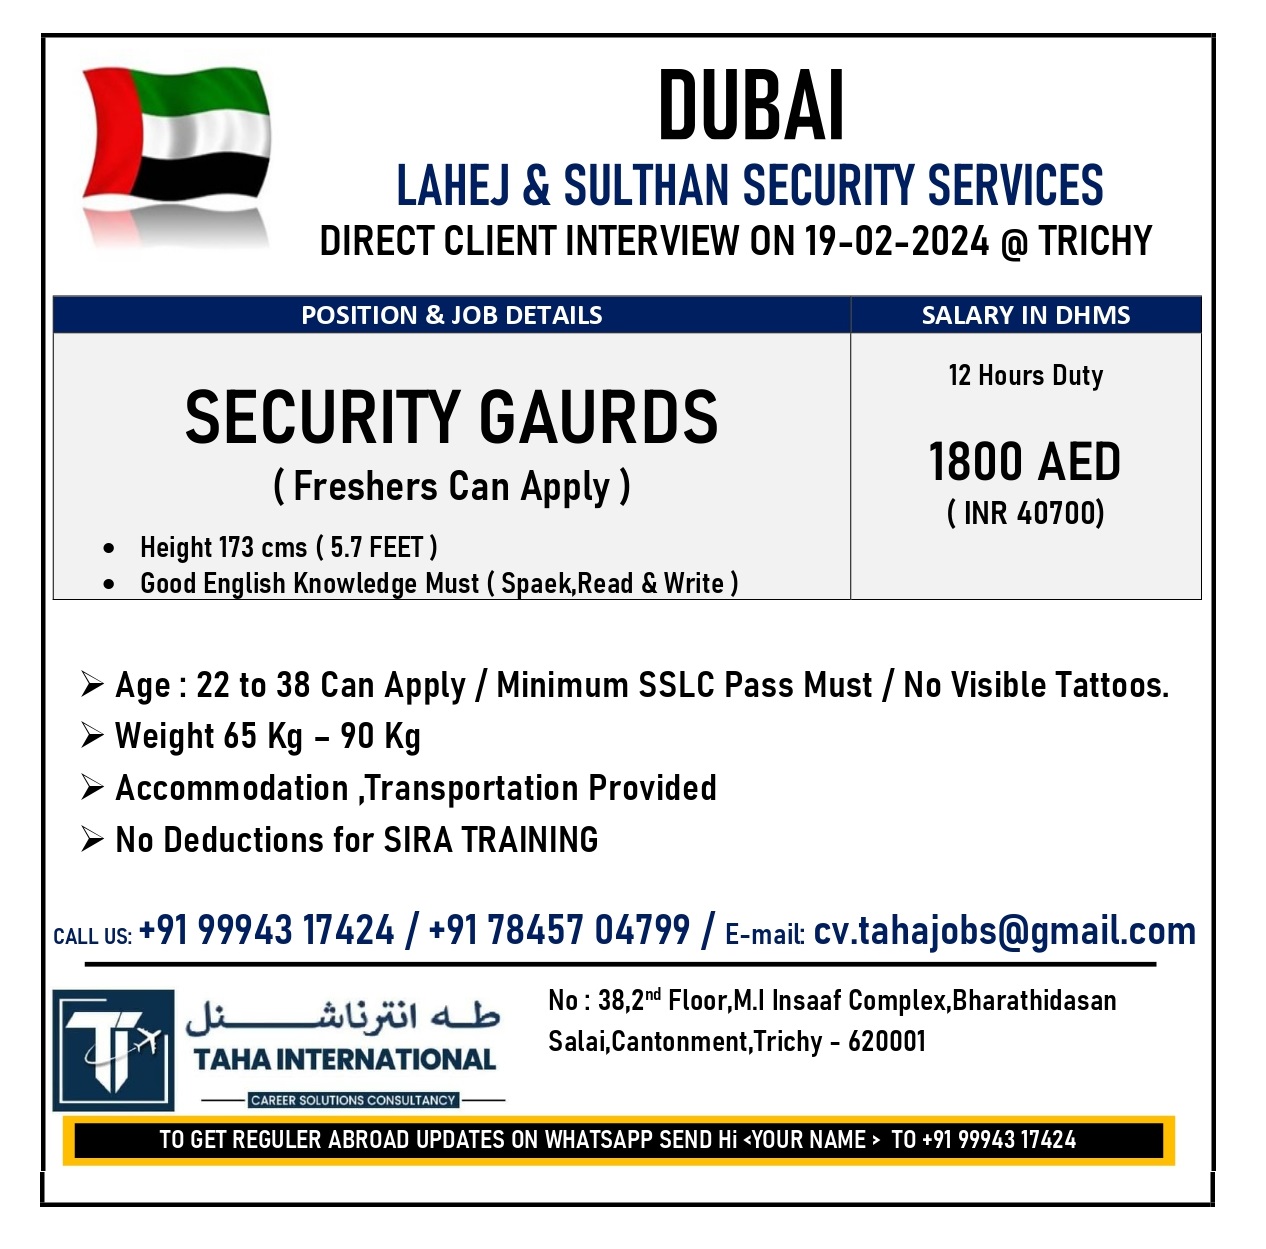 LAHEJ & SULTHAN SECURITY SERVICES – CLIENT INTERVIEW ON 19-02-2024 @ TRICHY